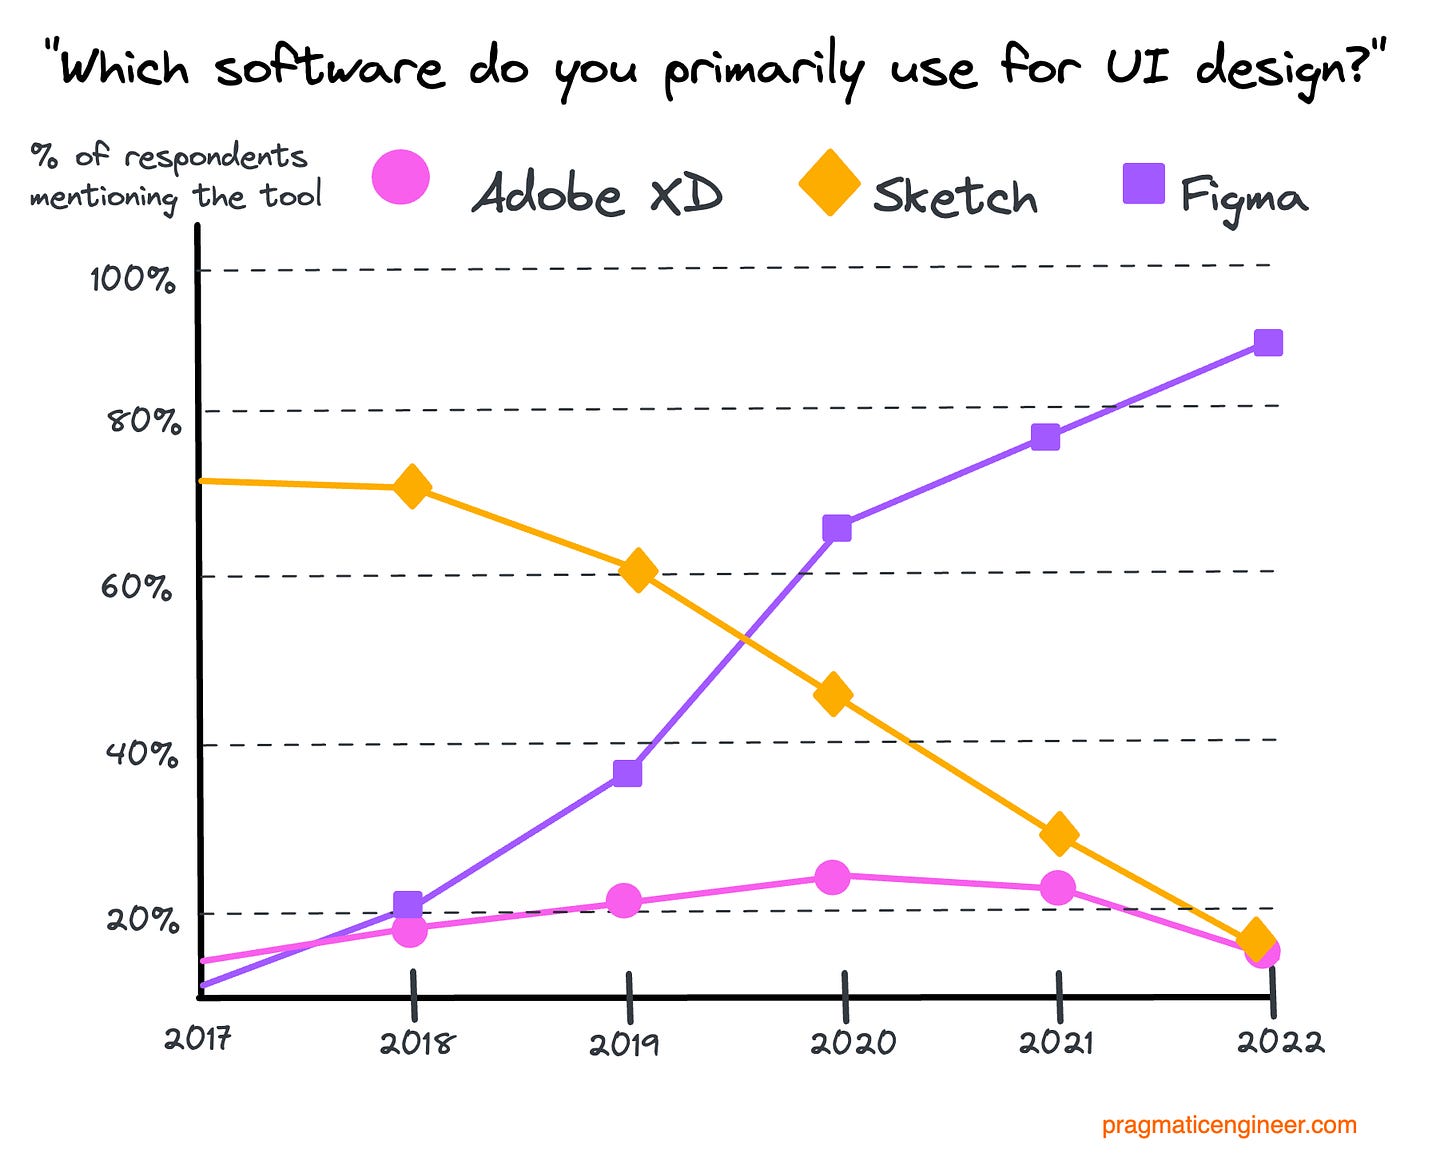 Market share of UI design tools, based on the annual UX Design Tools Survey, to which 4,000 designers contributed in 2022